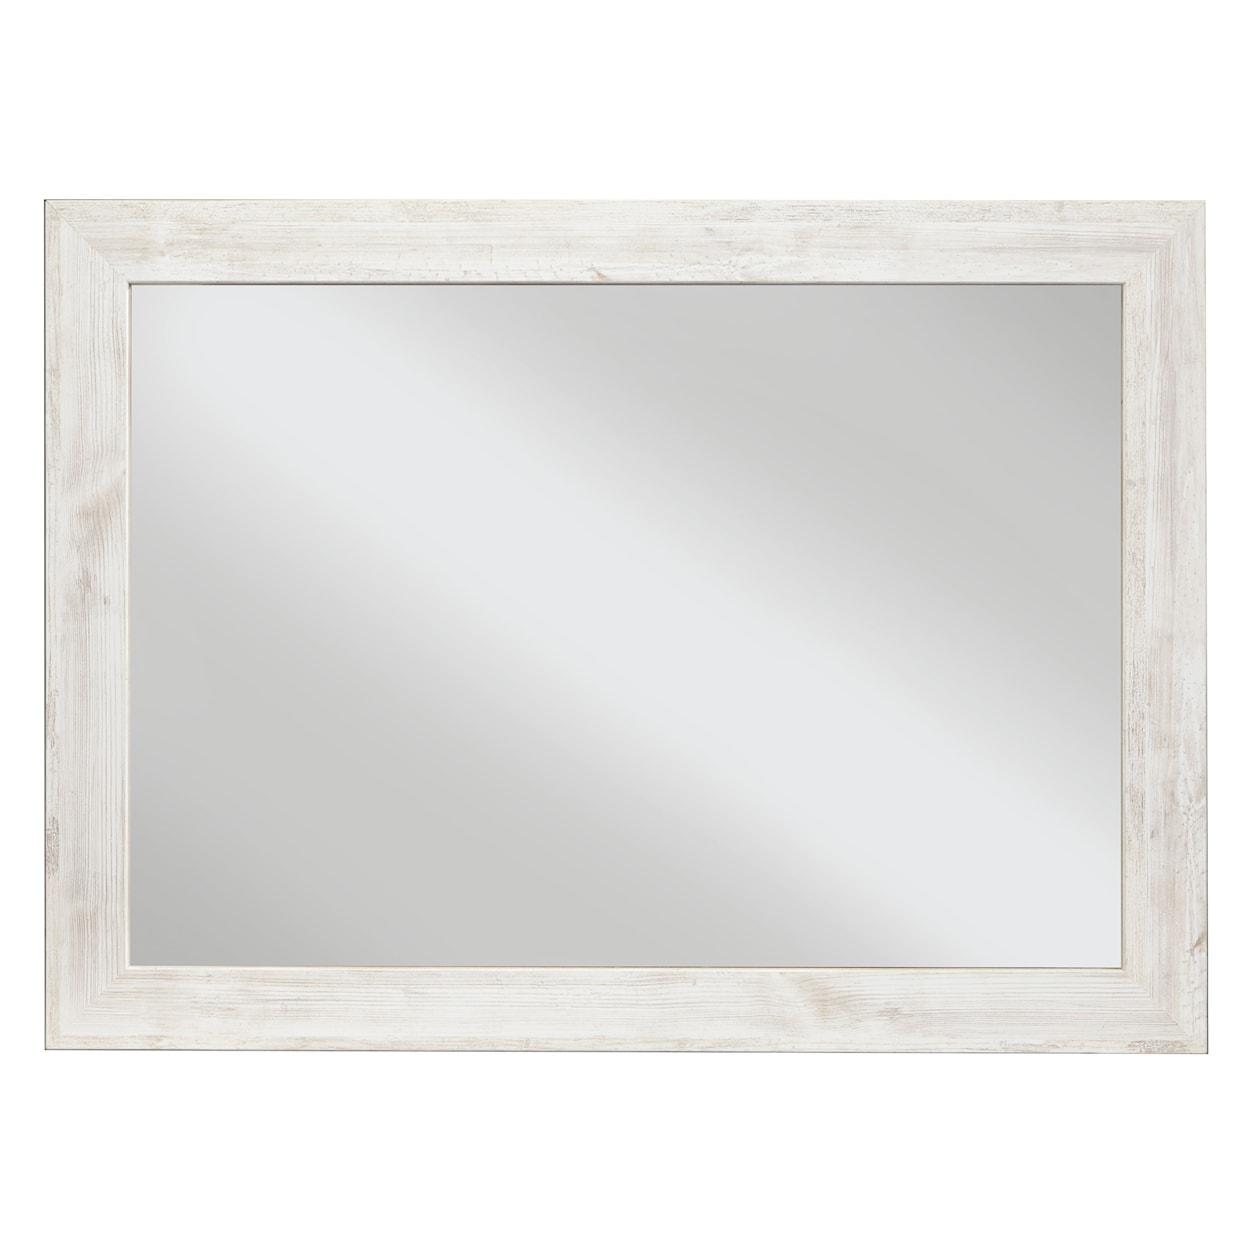 Signature Design by Ashley Paxberry Bedroom Mirror